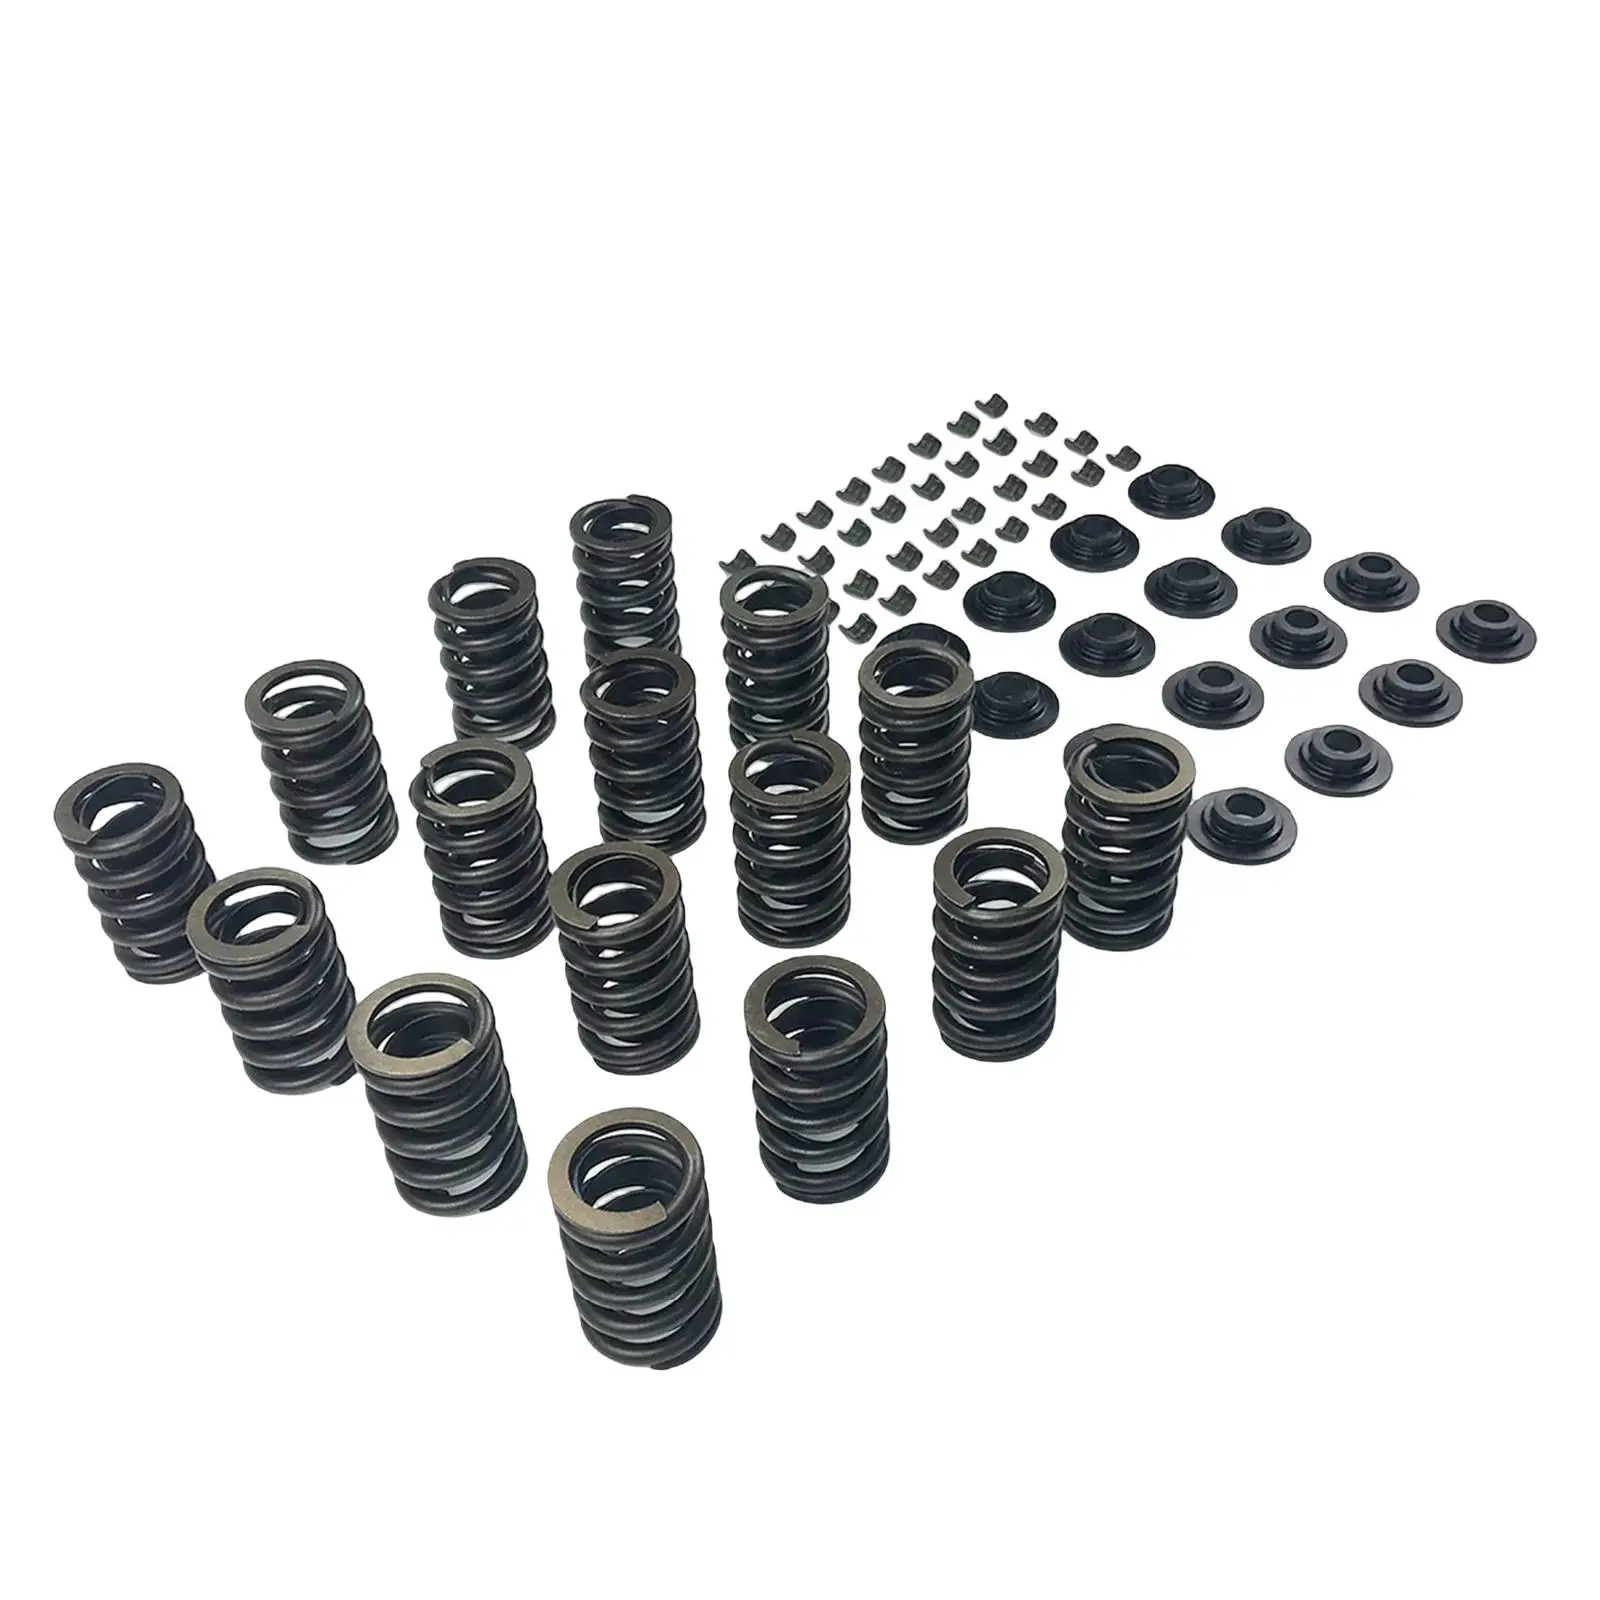 64 Pieces Valve Springs Kit with Retainer & Lock Fits for Chevy Sbc 327 350 400 Components